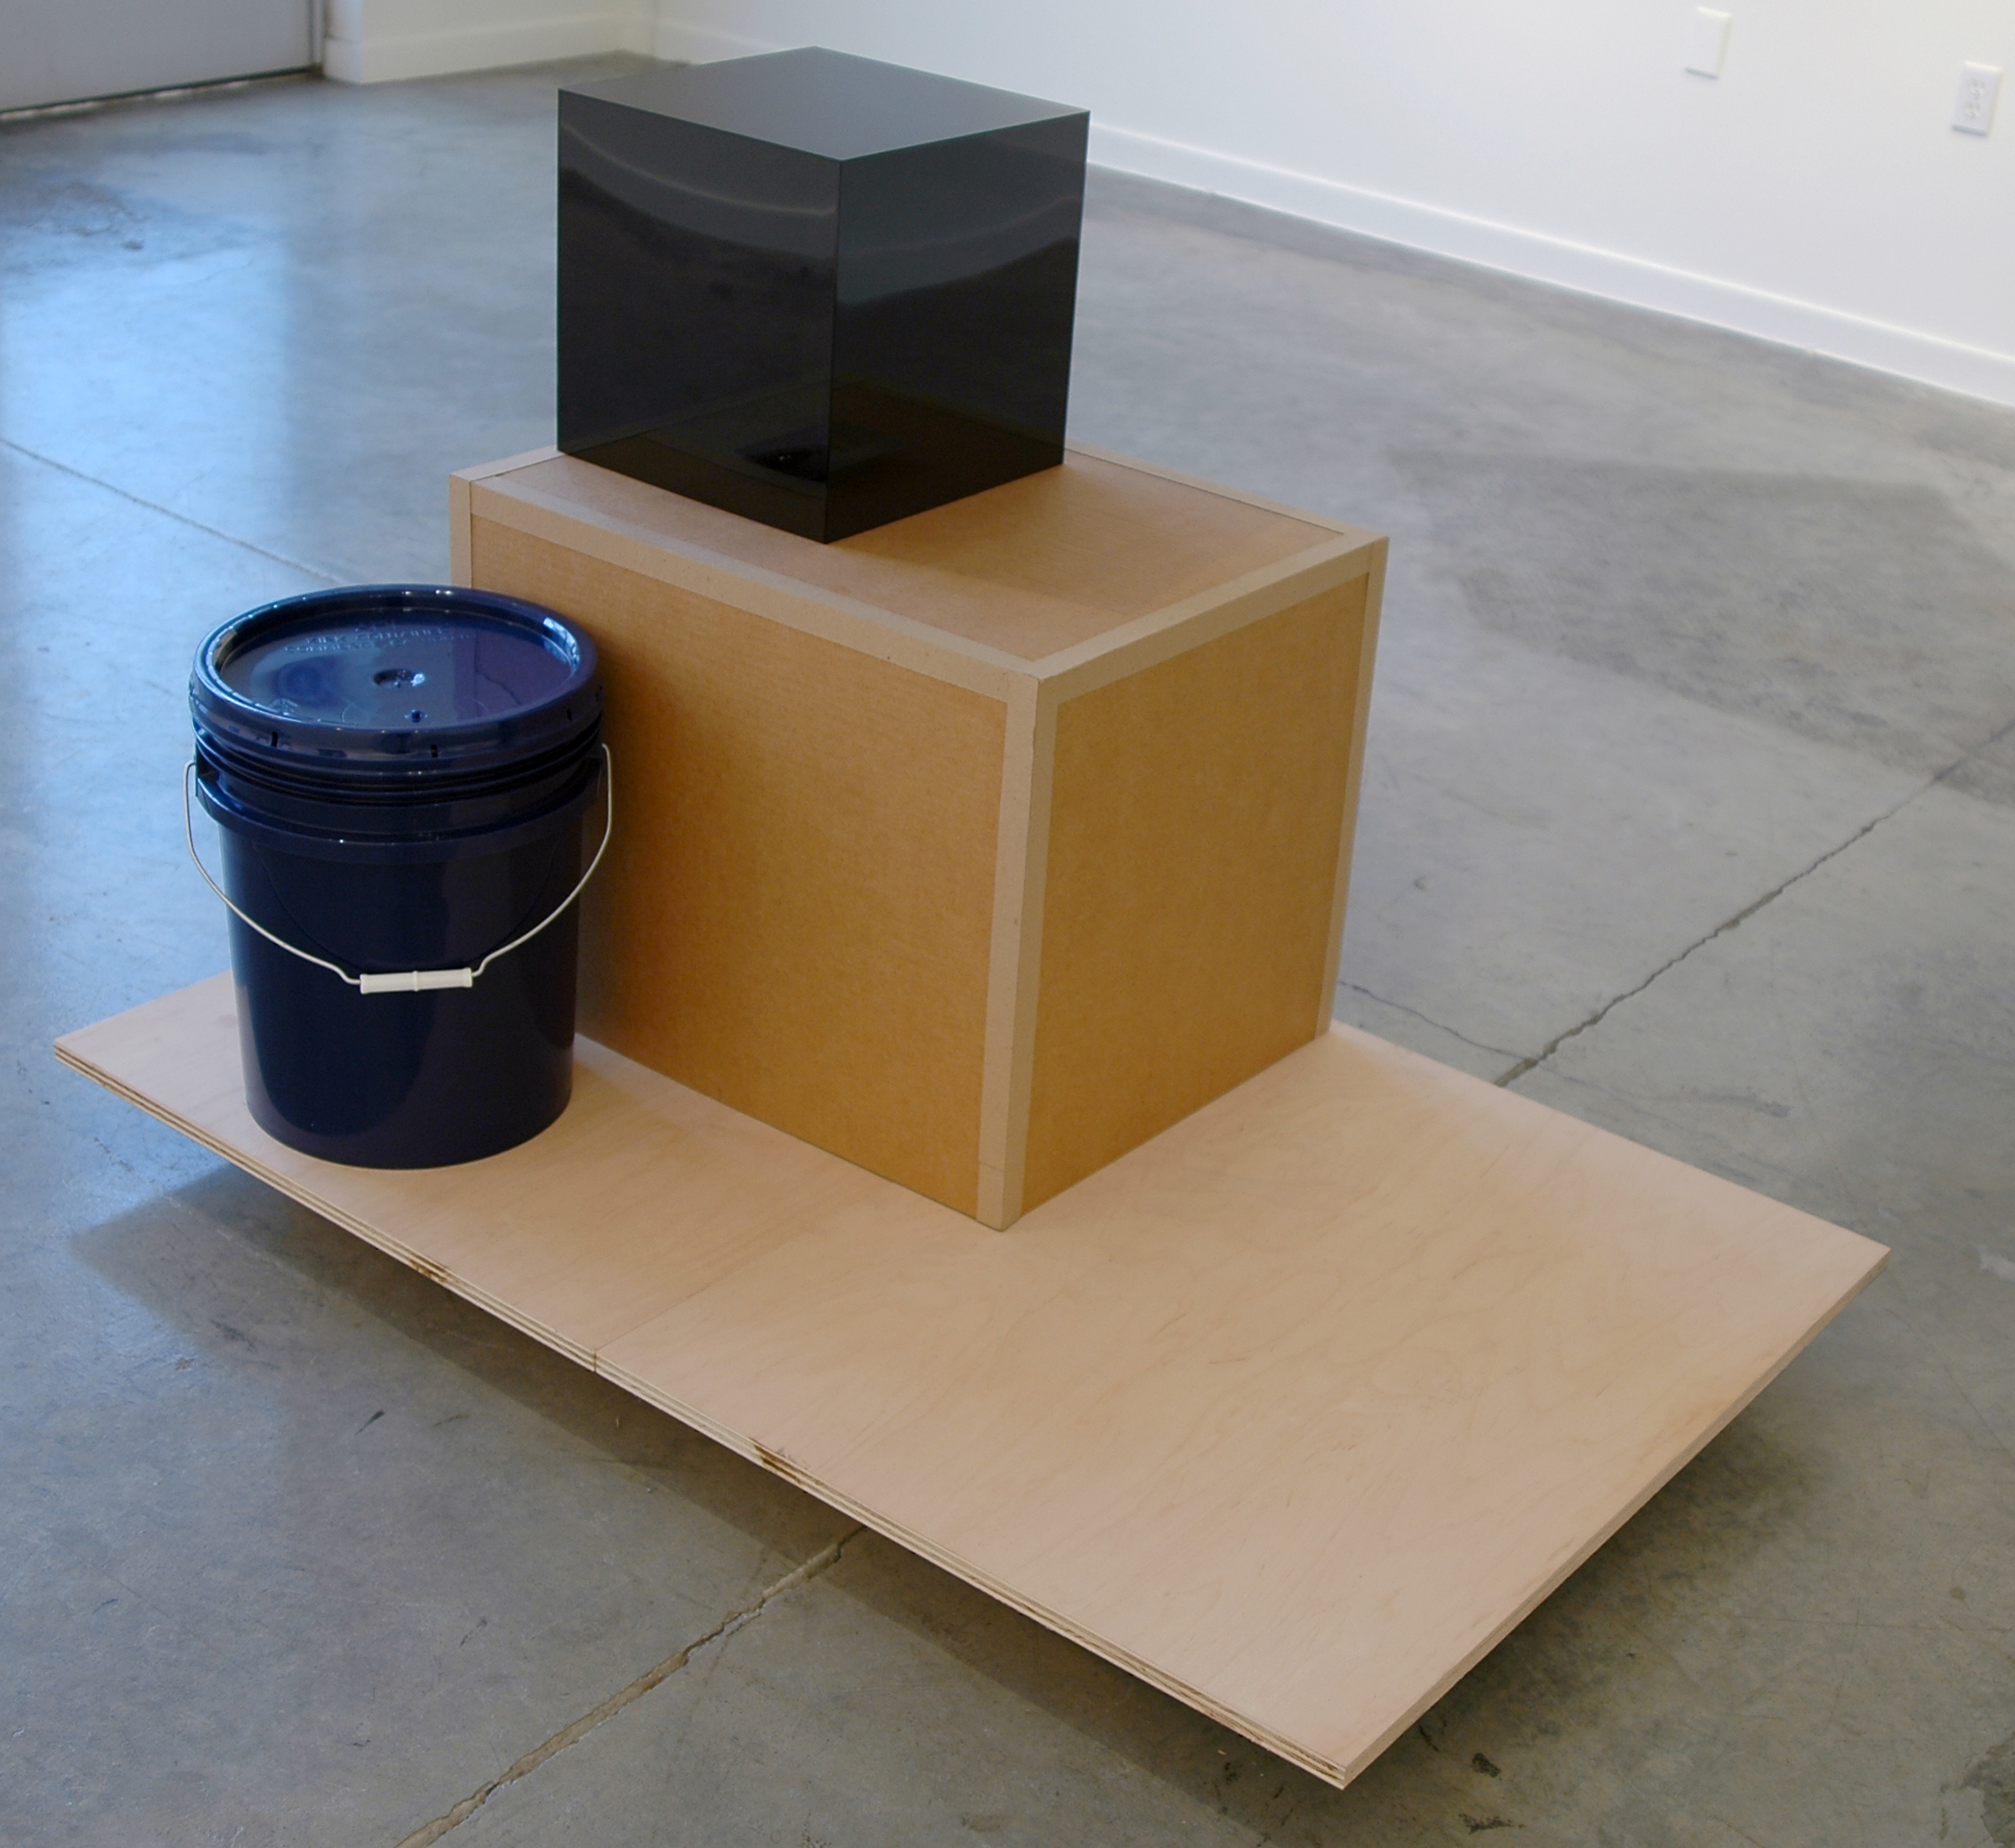   PABLO GUARDIOLA   San Francisco, don't be afraid of the vastness of the world, of the immensity of the sea. Your thing is the air  wood, cardboard, blue bucket, plexiglass and postcard, 51" L x 32" W x 34.5" H, 2011 